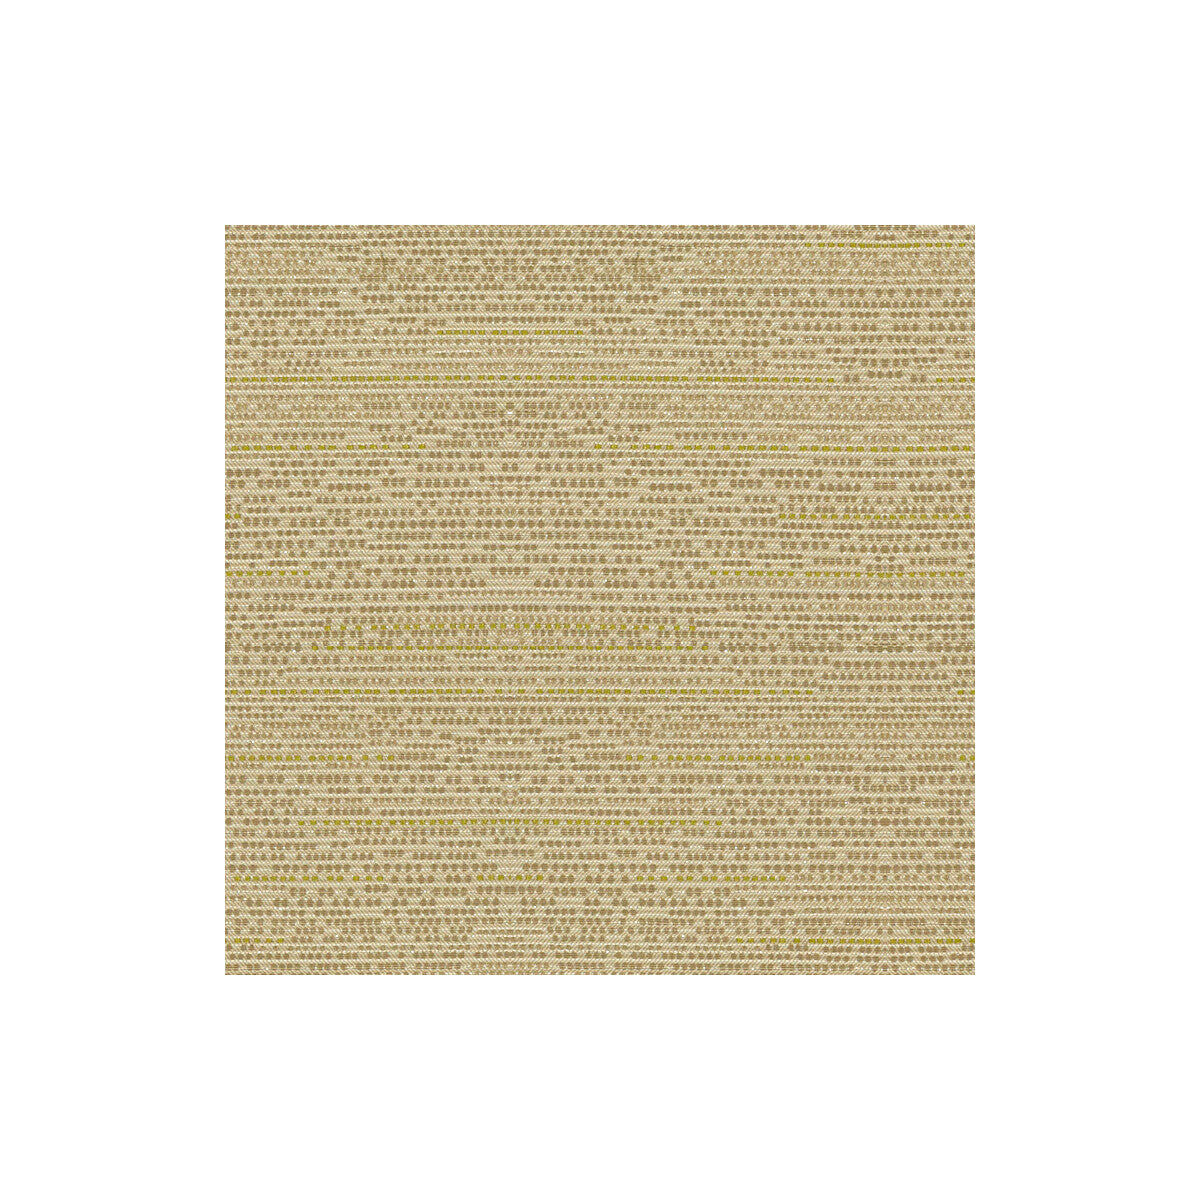 Waterline fabric in silver dune color - pattern 32934.311.0 - by Kravet Contract in the Contract Gis collection